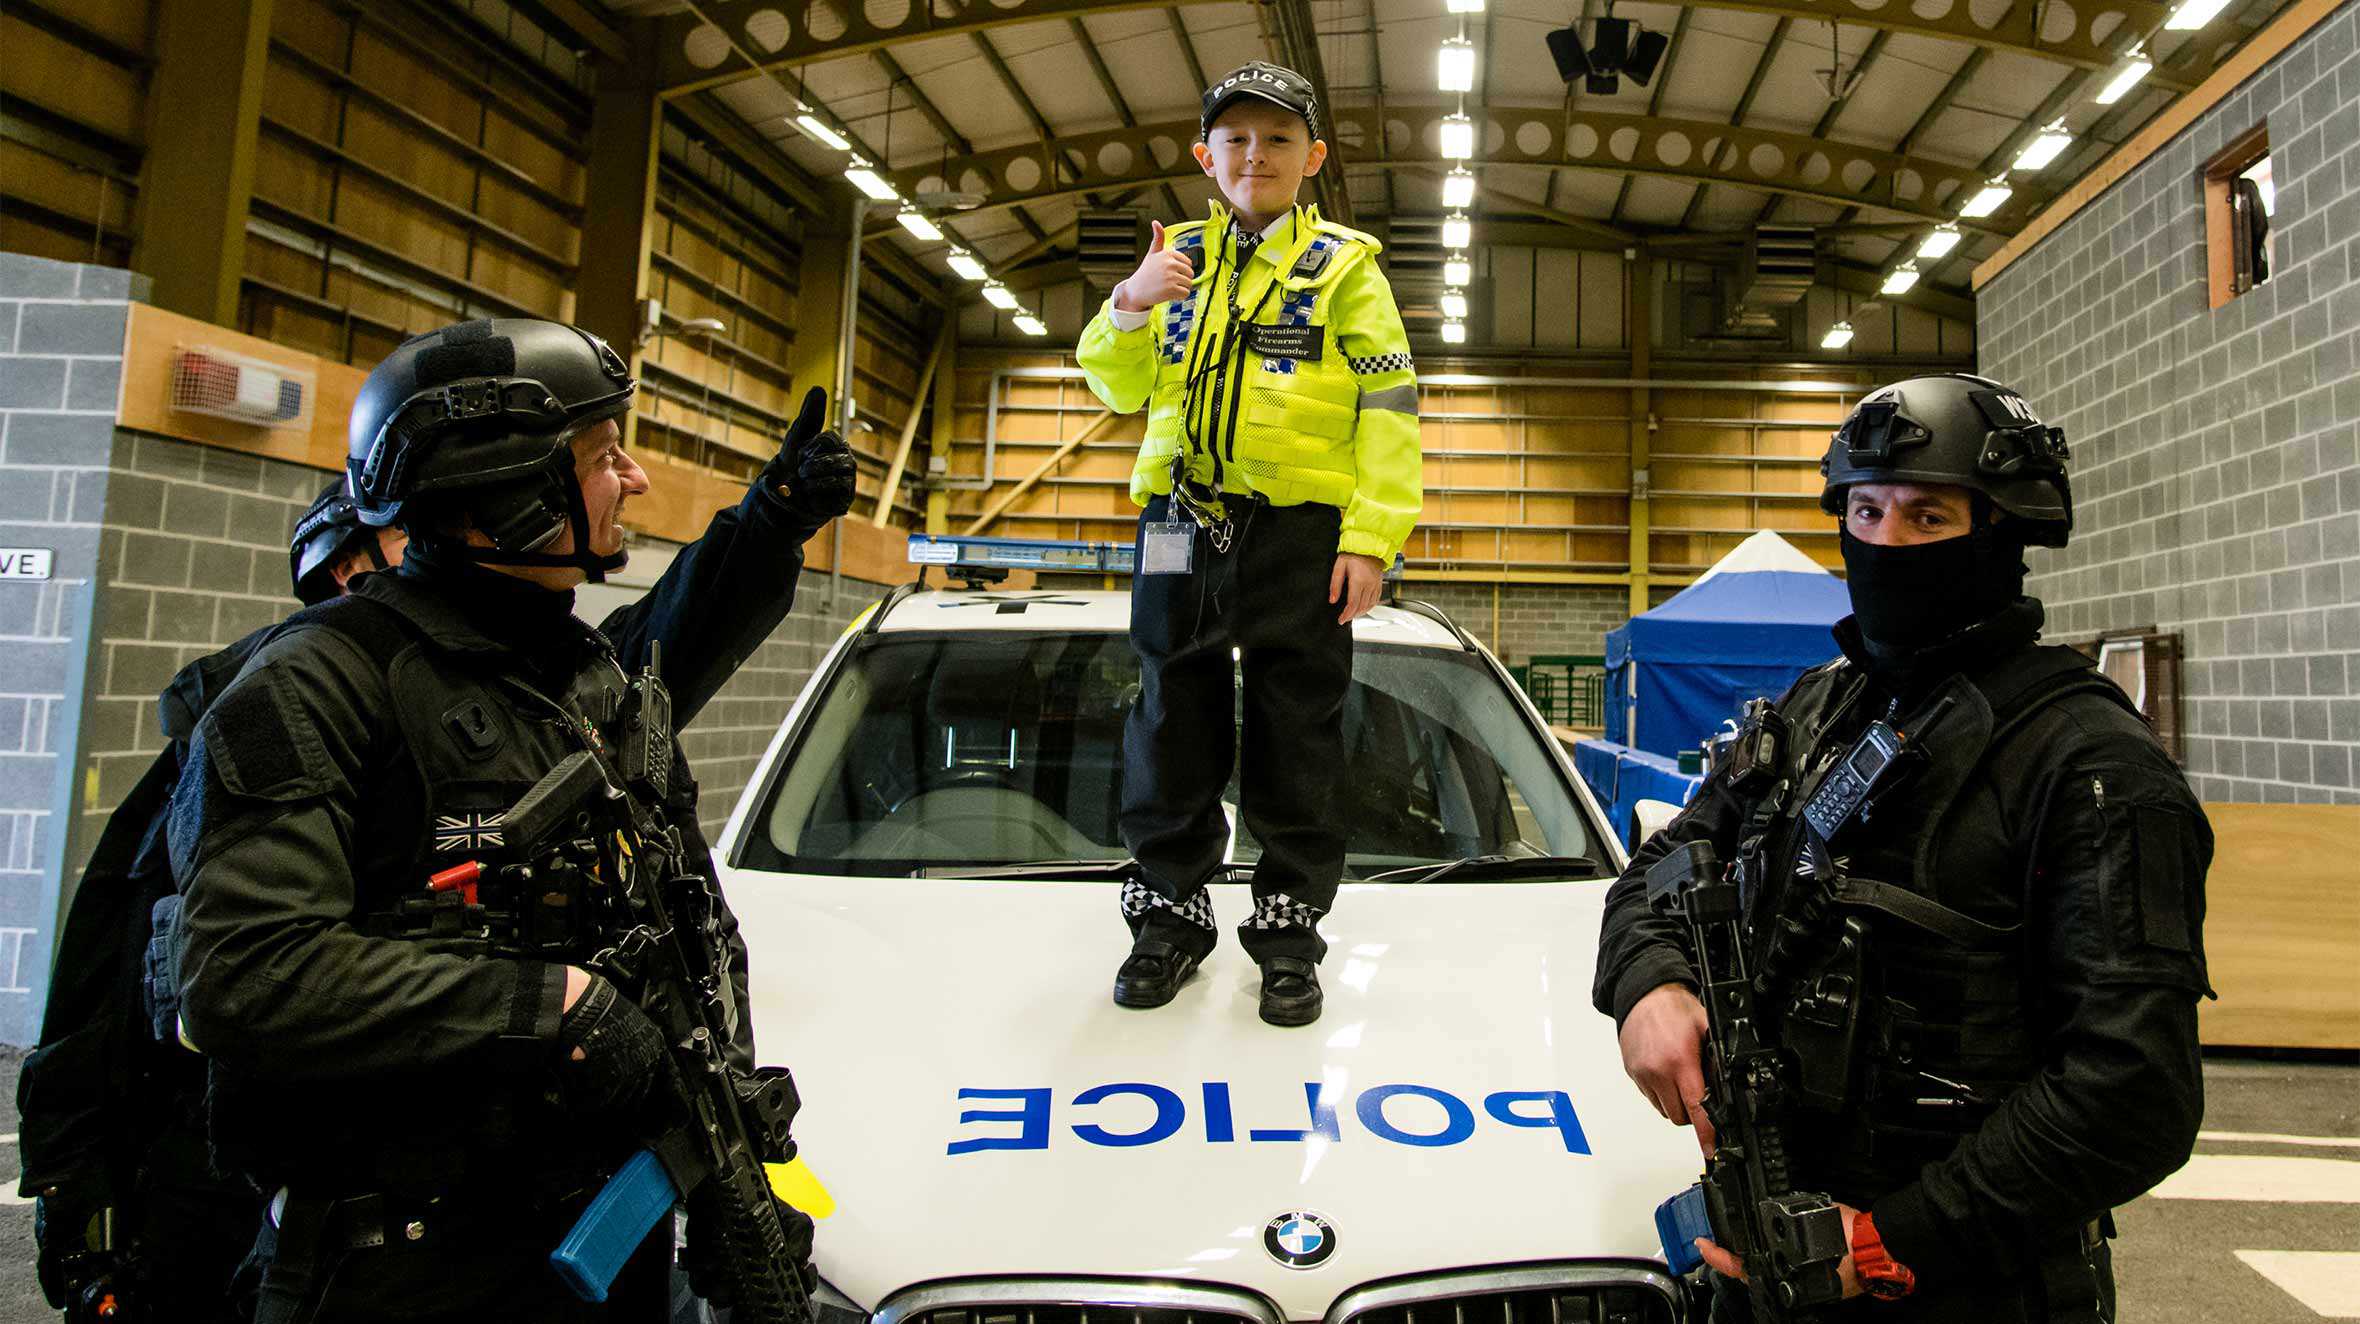 Allan standing on the bonnet of a police car with armed response officers.